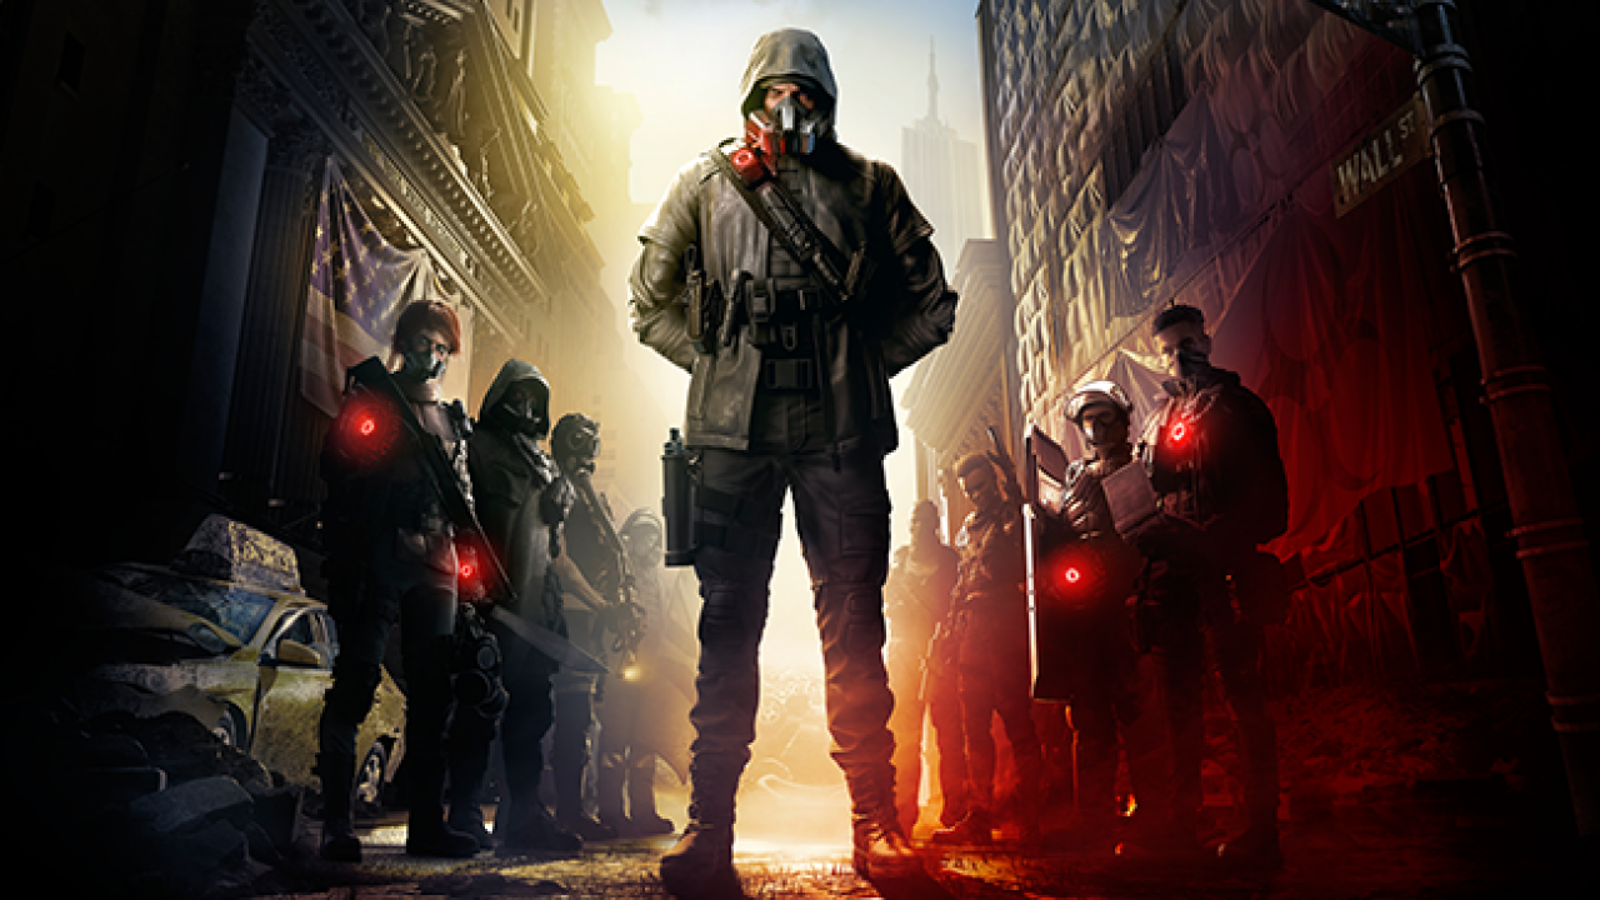 Mobile games based on Rainbow Six and The Division are scheduled